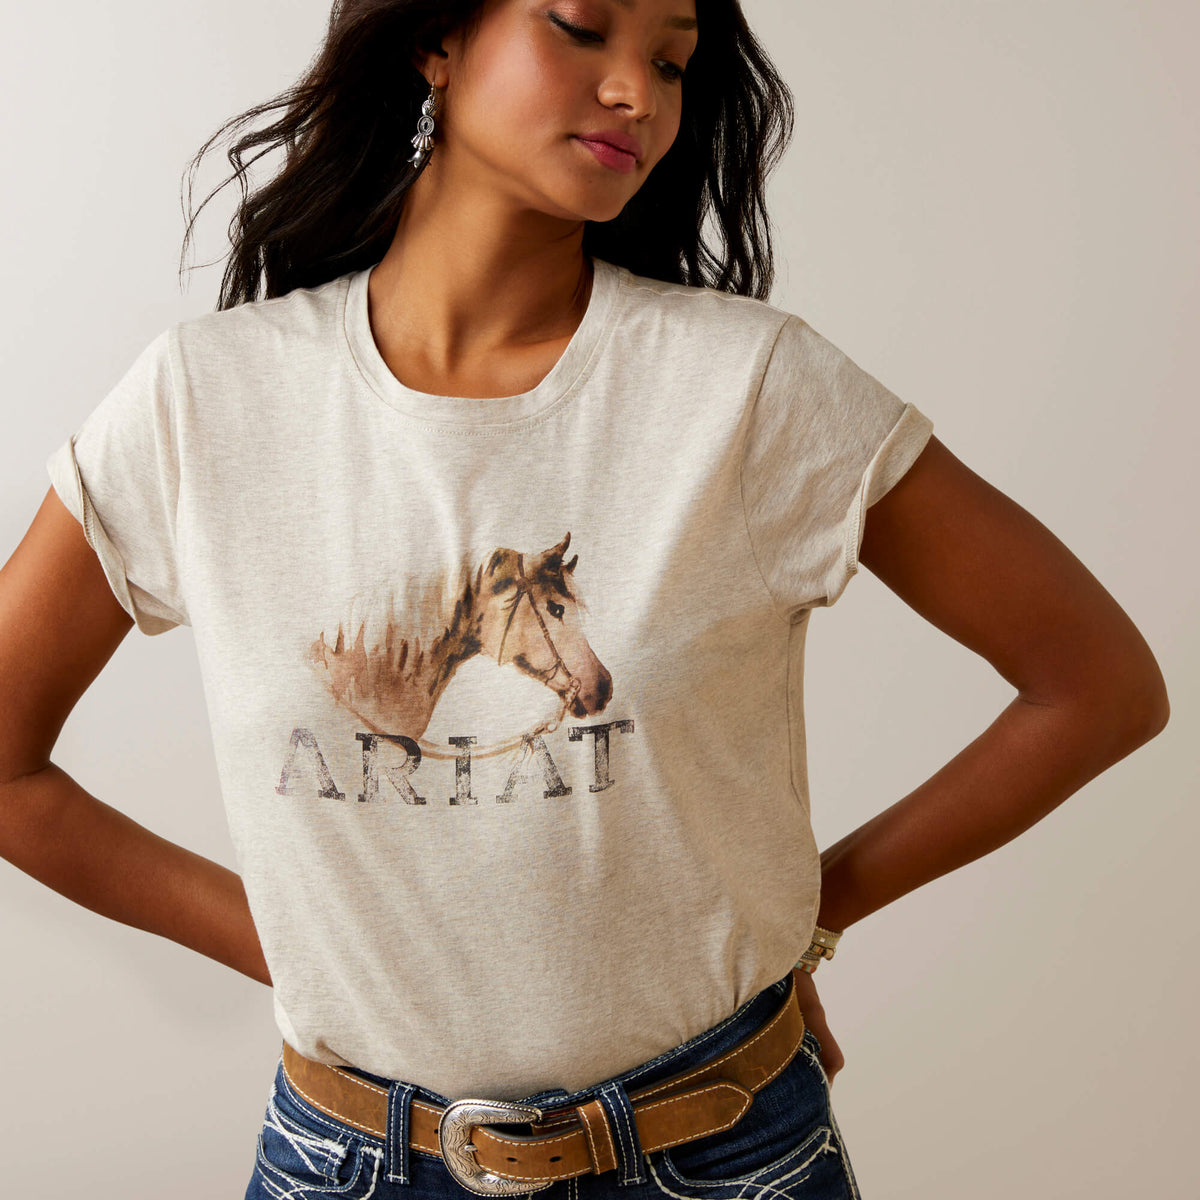 Ariat Women's Caballo Oatmeal Heather Graphic Tee Regular and Plus Sizes